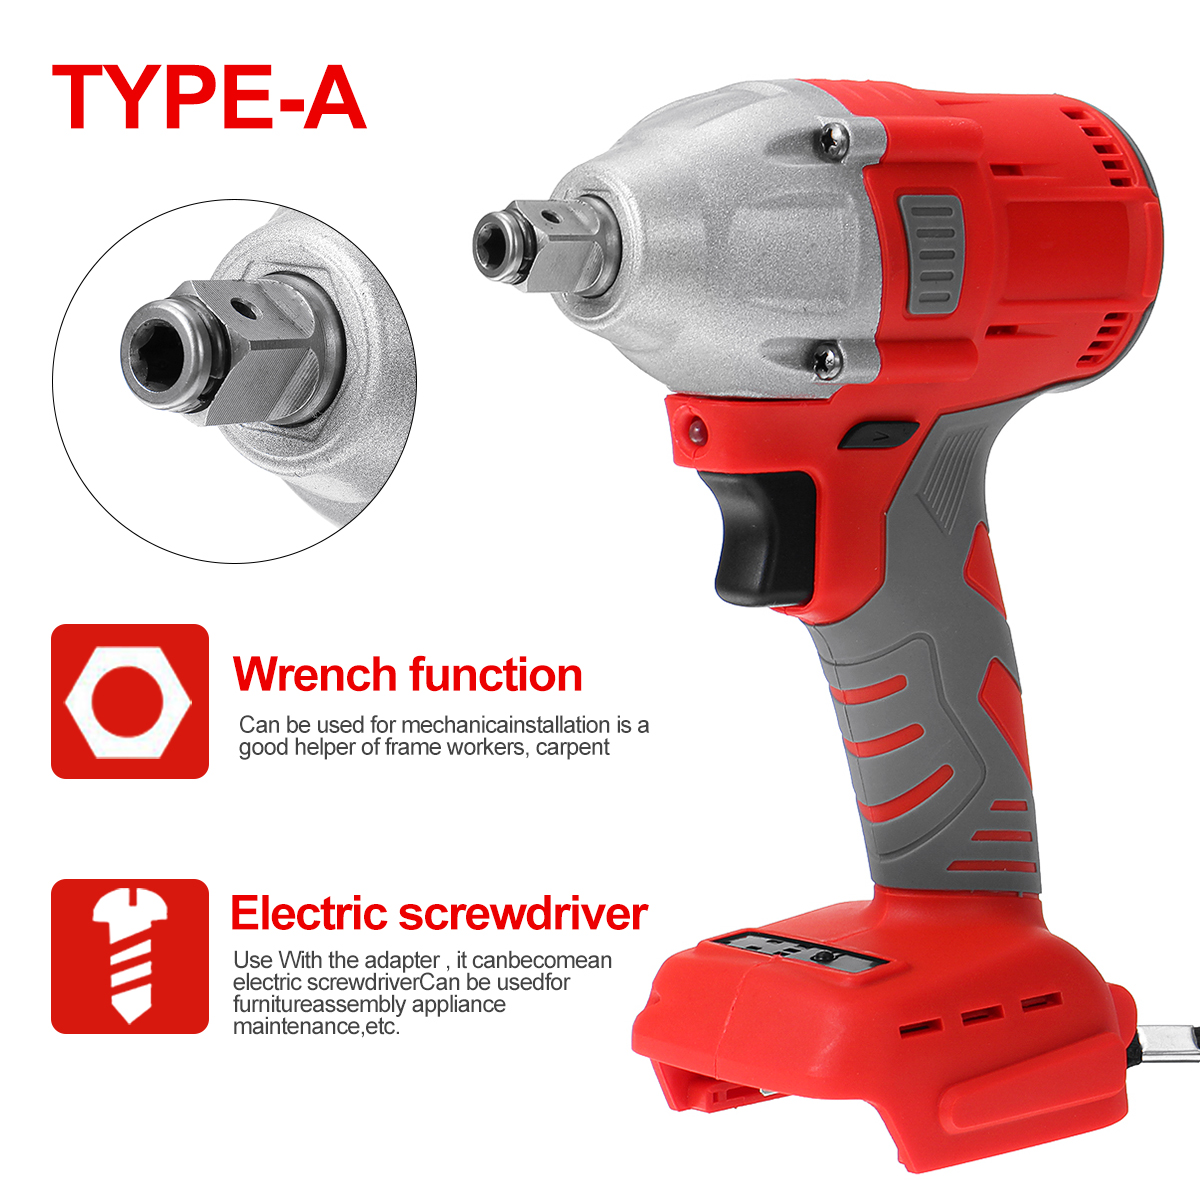 800NM-Brushless-Torque-Wrench-Electric-Screwdriver-Wrench-Cordless-Rechargable-Screw-Driver-Wrench-P-1843516-5